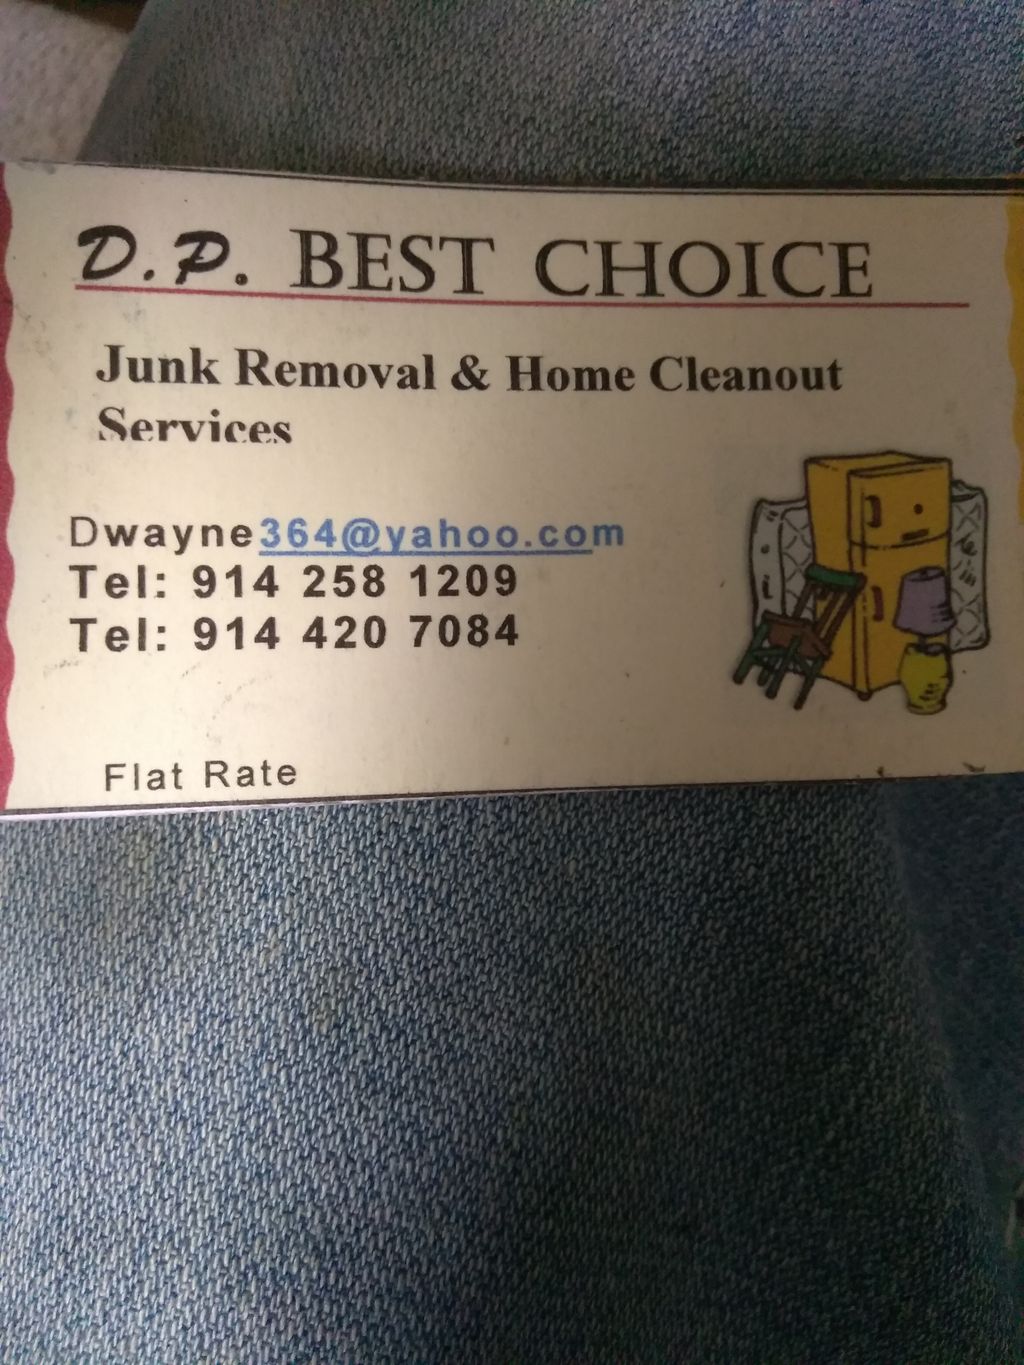 DP Best choice moving